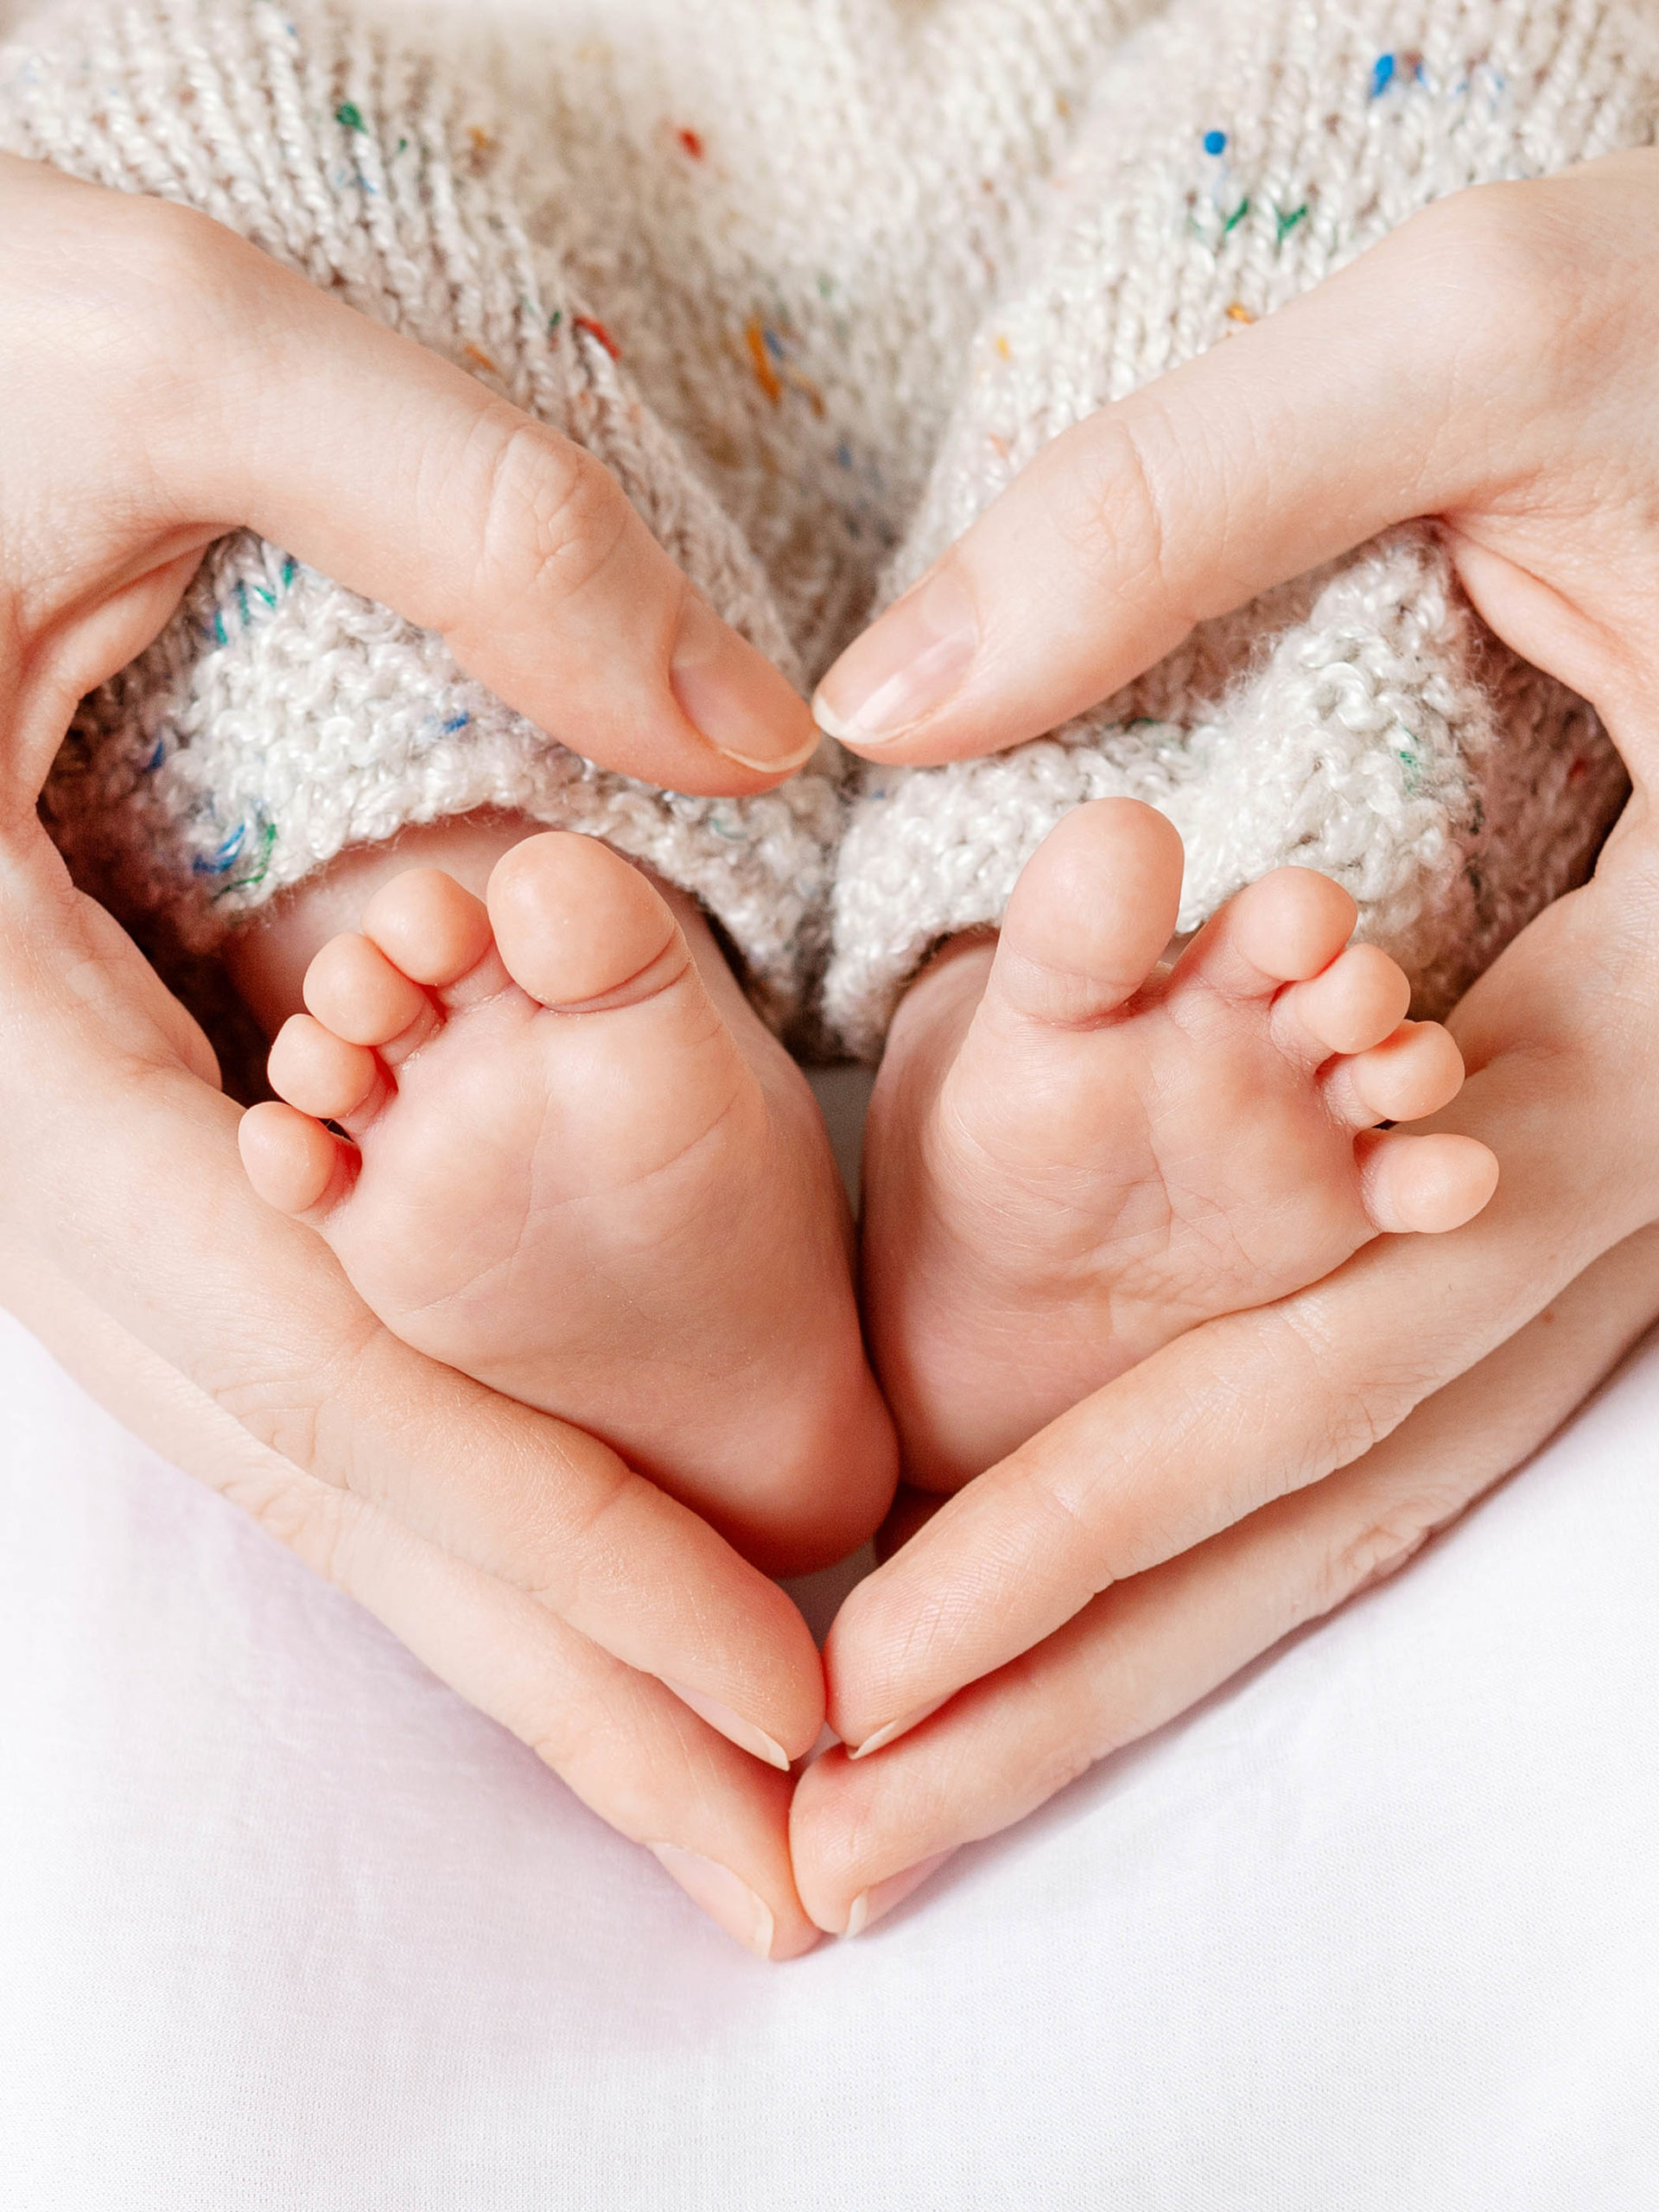 mom holding baby feet in her hands making a heart shape